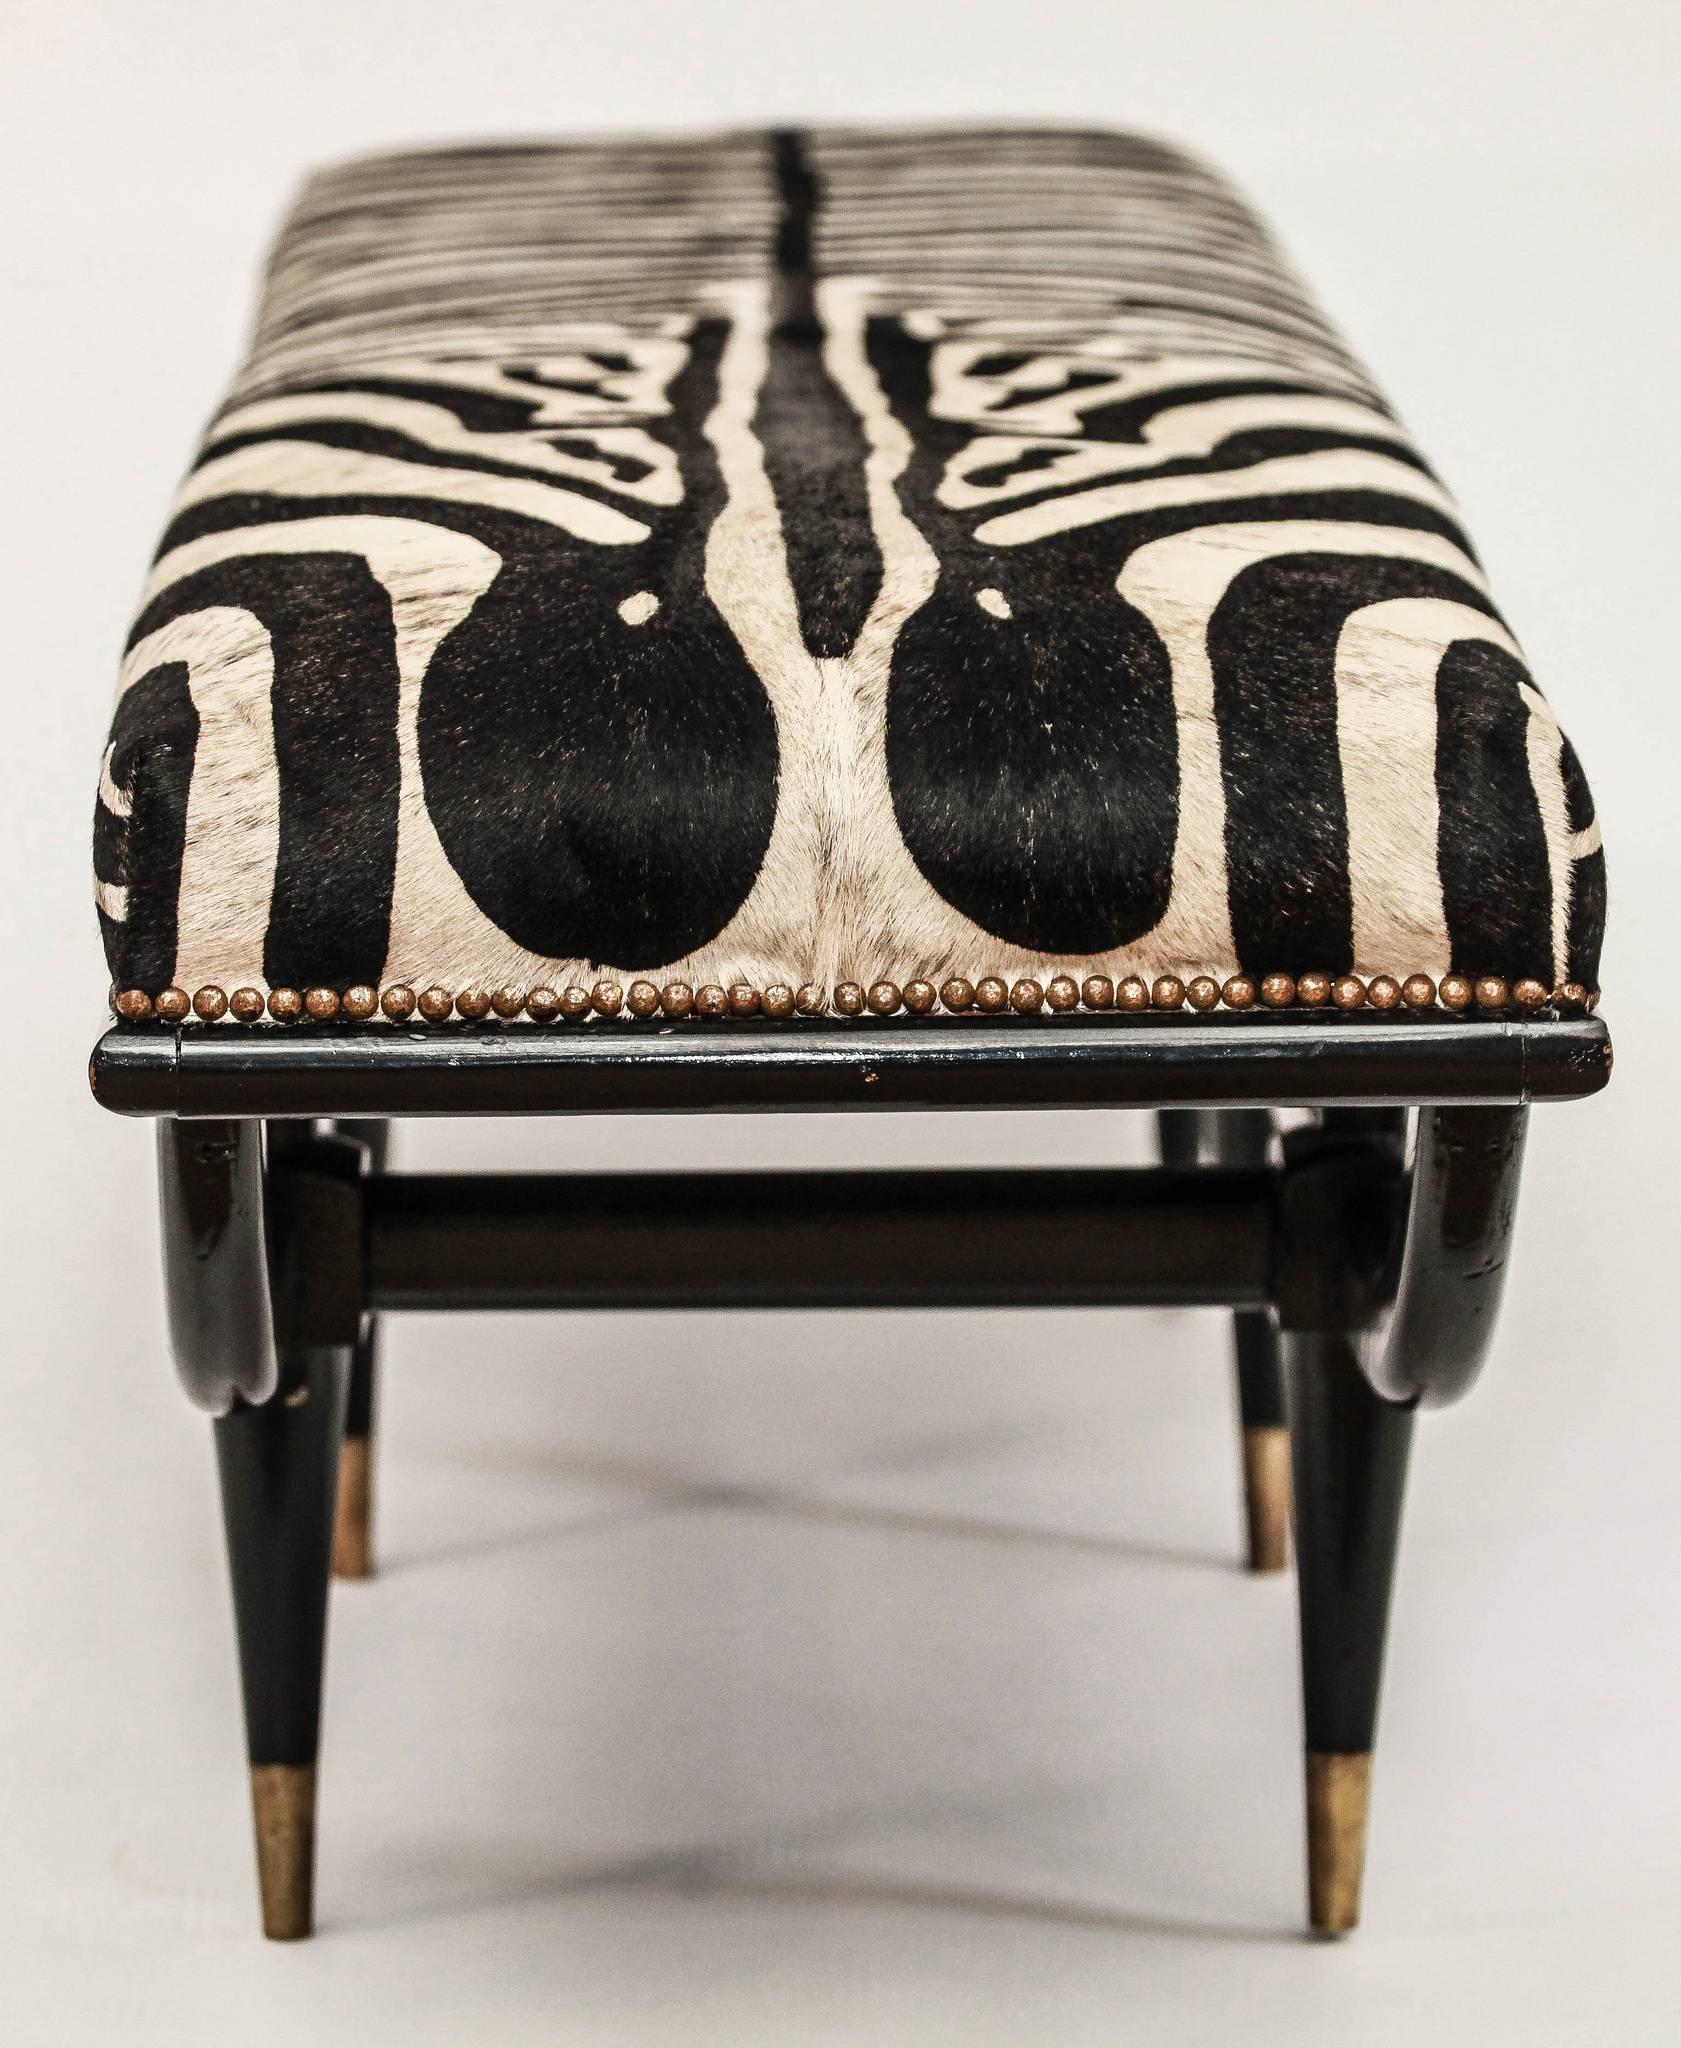 A Mid-Century Italian ebonized bench upholstered in a handsome zebra printed hair hide with bronze sabots.